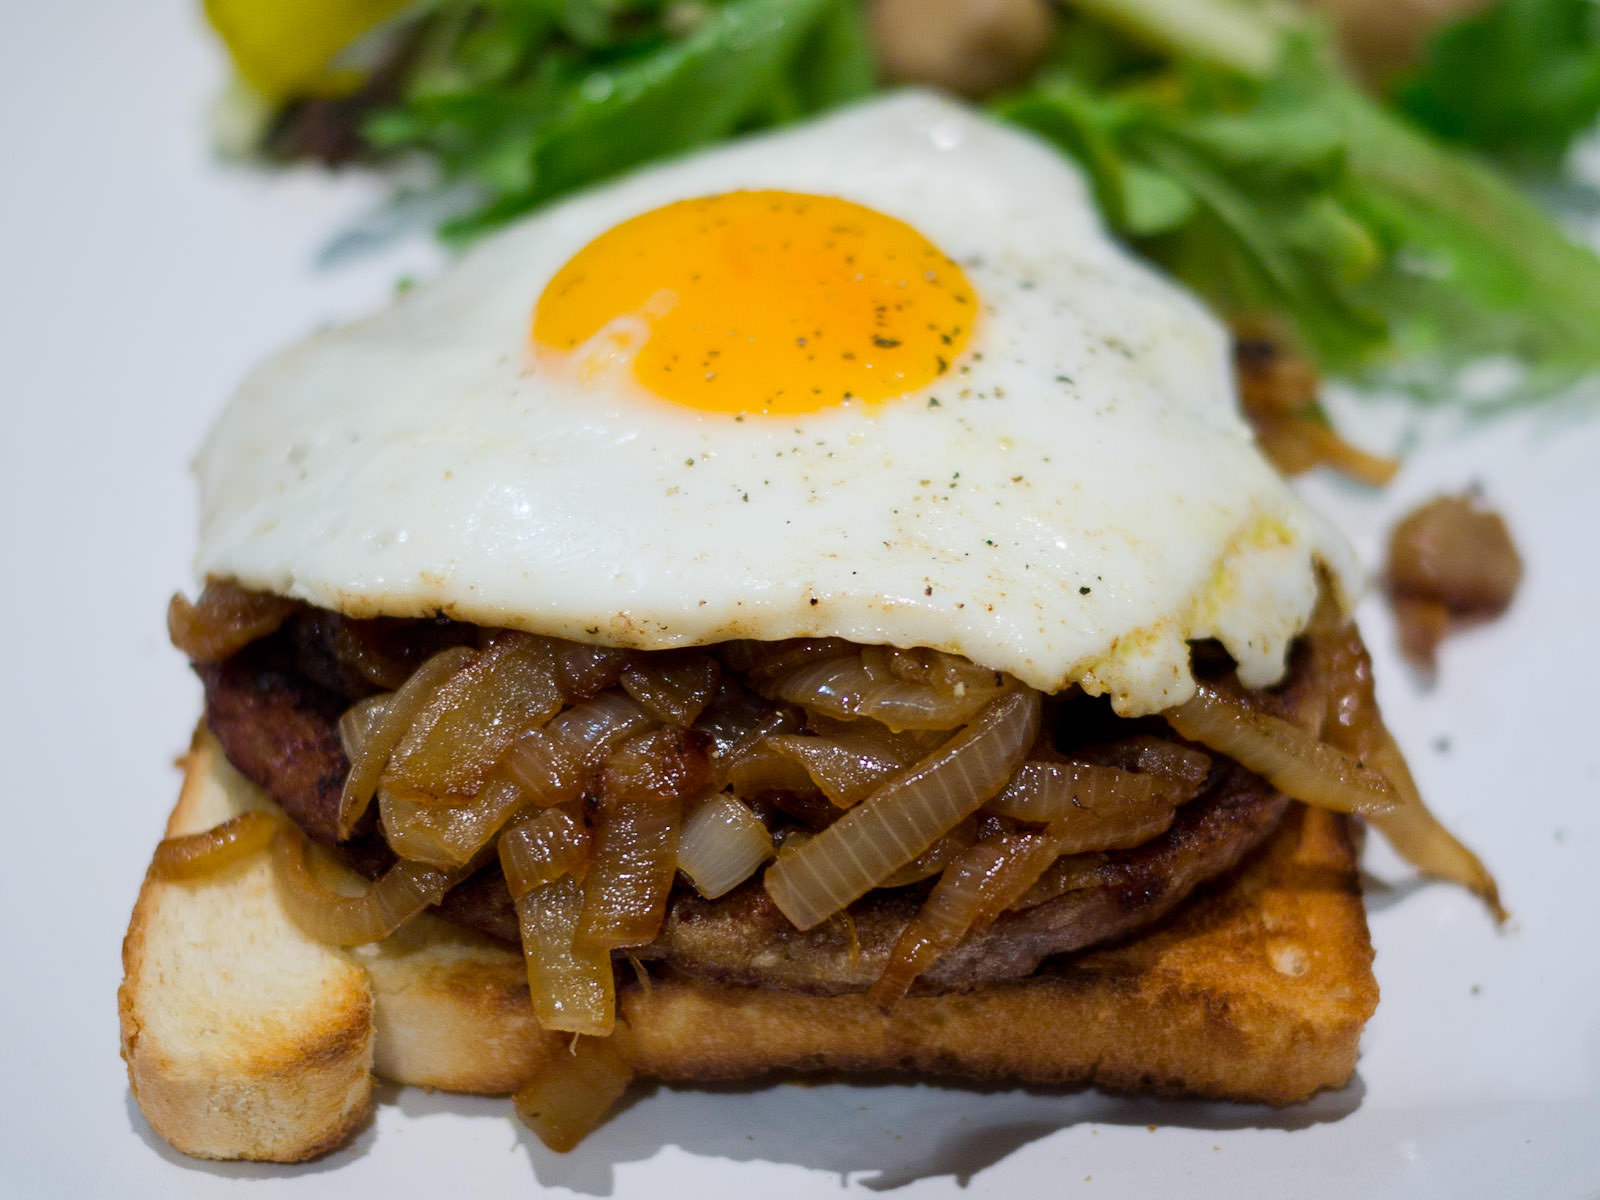 Fried egg, onions and burger pattie on toast with pickles and green salad